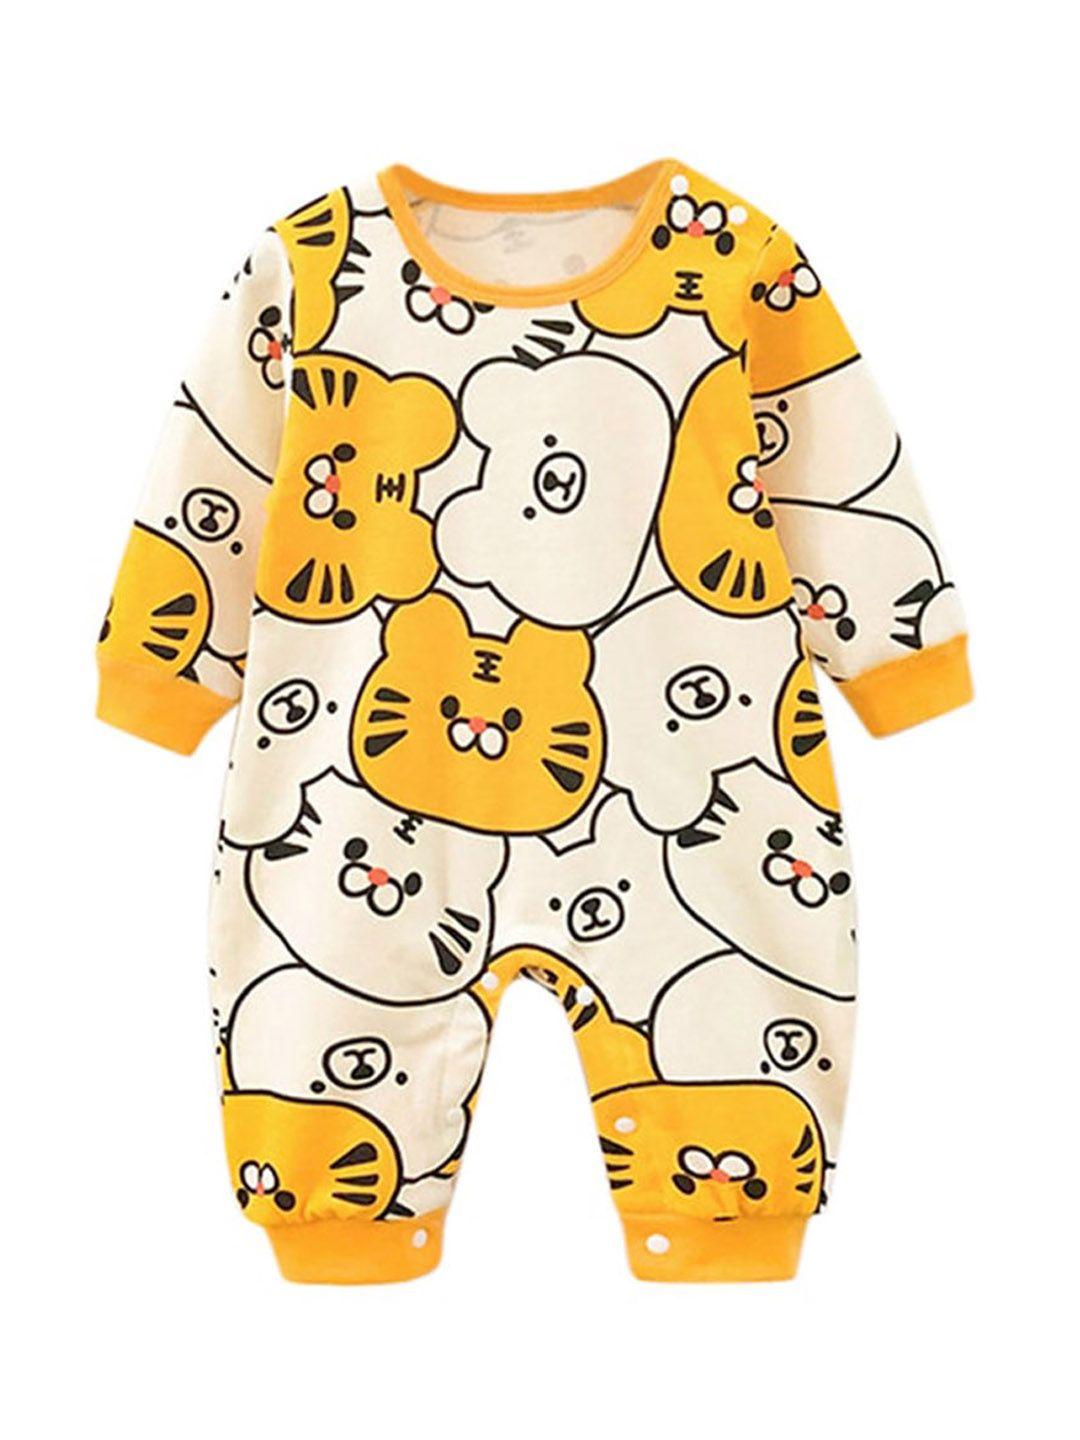 stylecast yellow infant boys conversational printed round neck cotton rompers